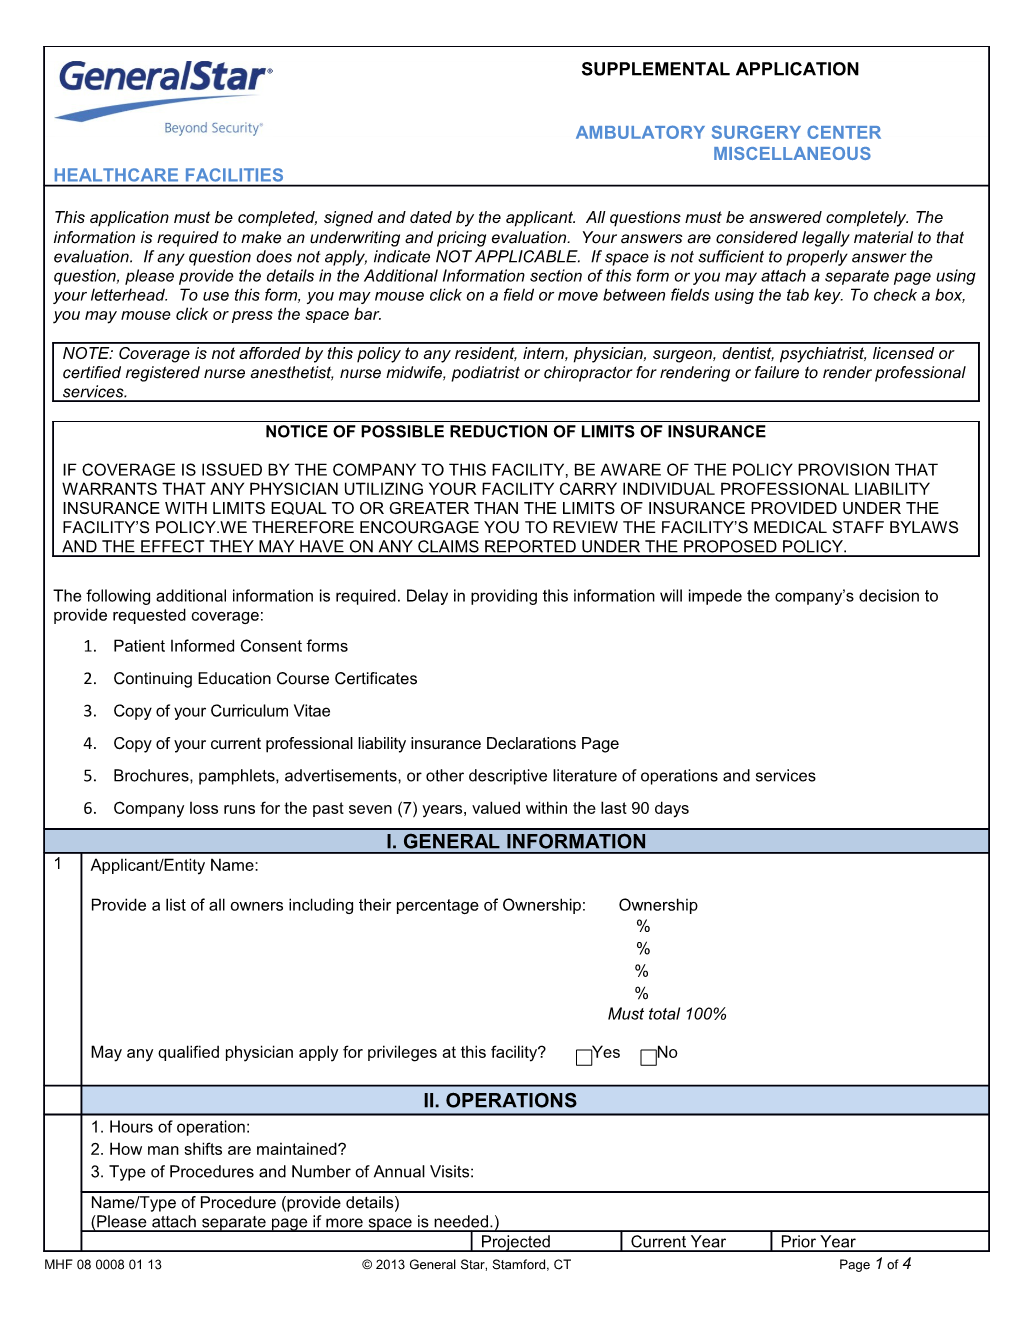 Patient Informed Consent Forms